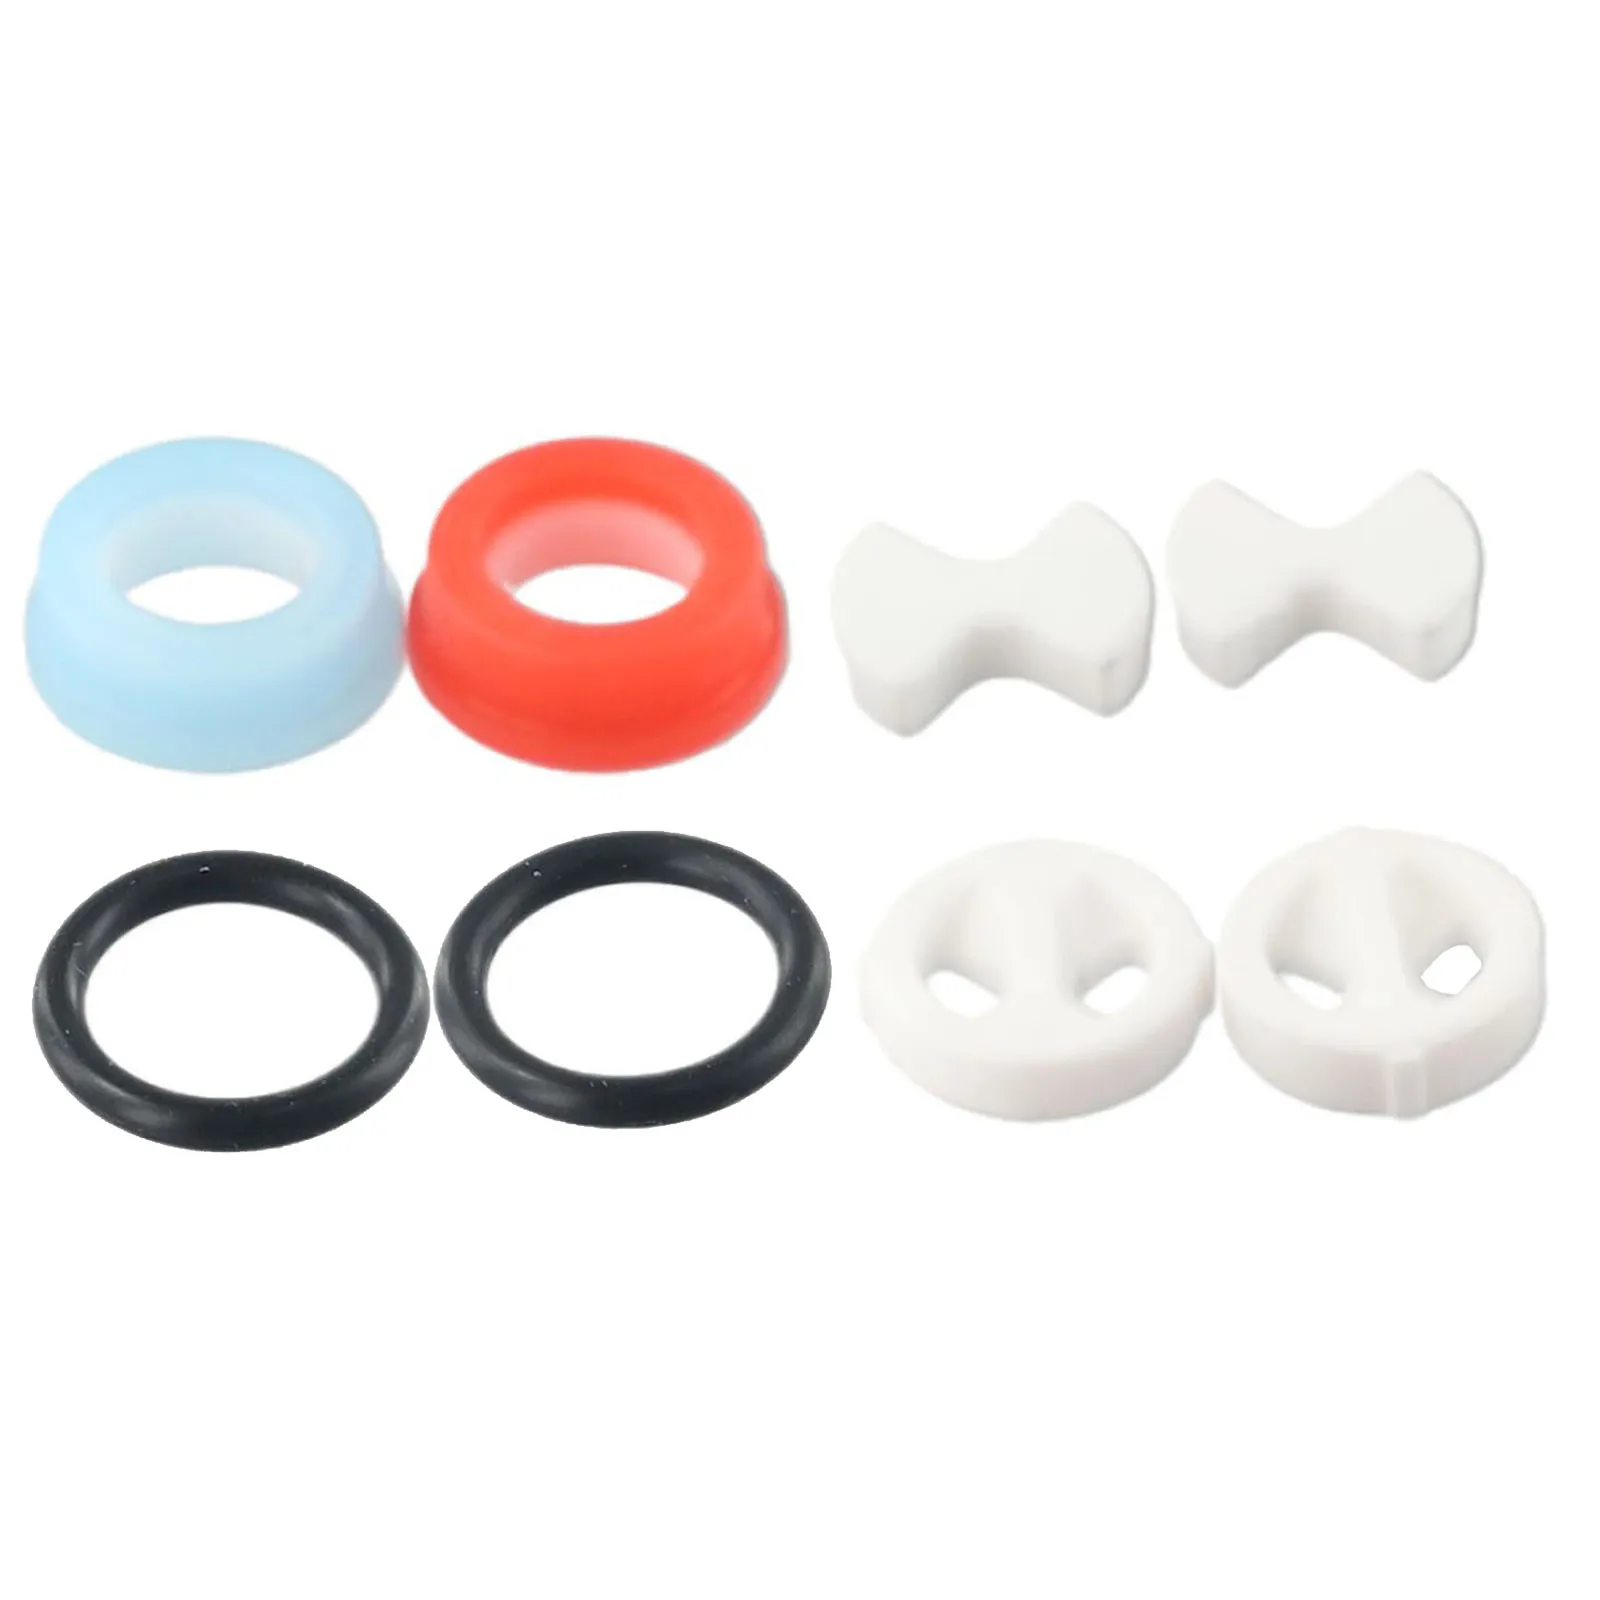 

100% New 8Pcs/set Ceramic Disc Silicon Washer Insert Turn Replacement 1/2" For Valve Tap Home Plumbing Accessories It Is Durable